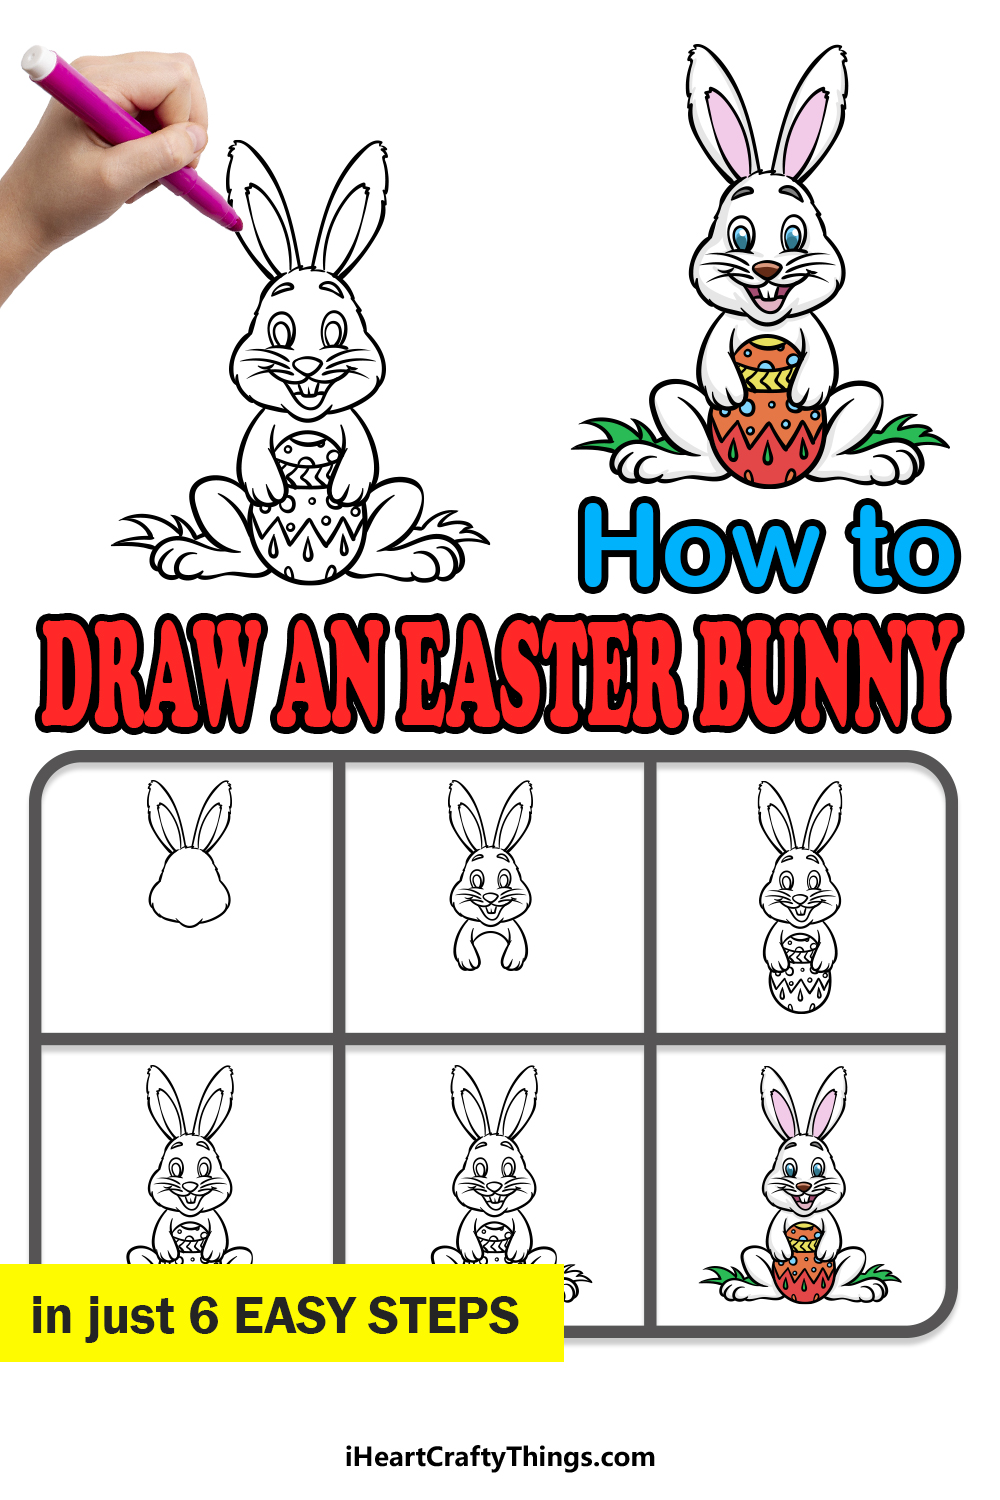 how to draw The Easter Bunny in 6 easy steps